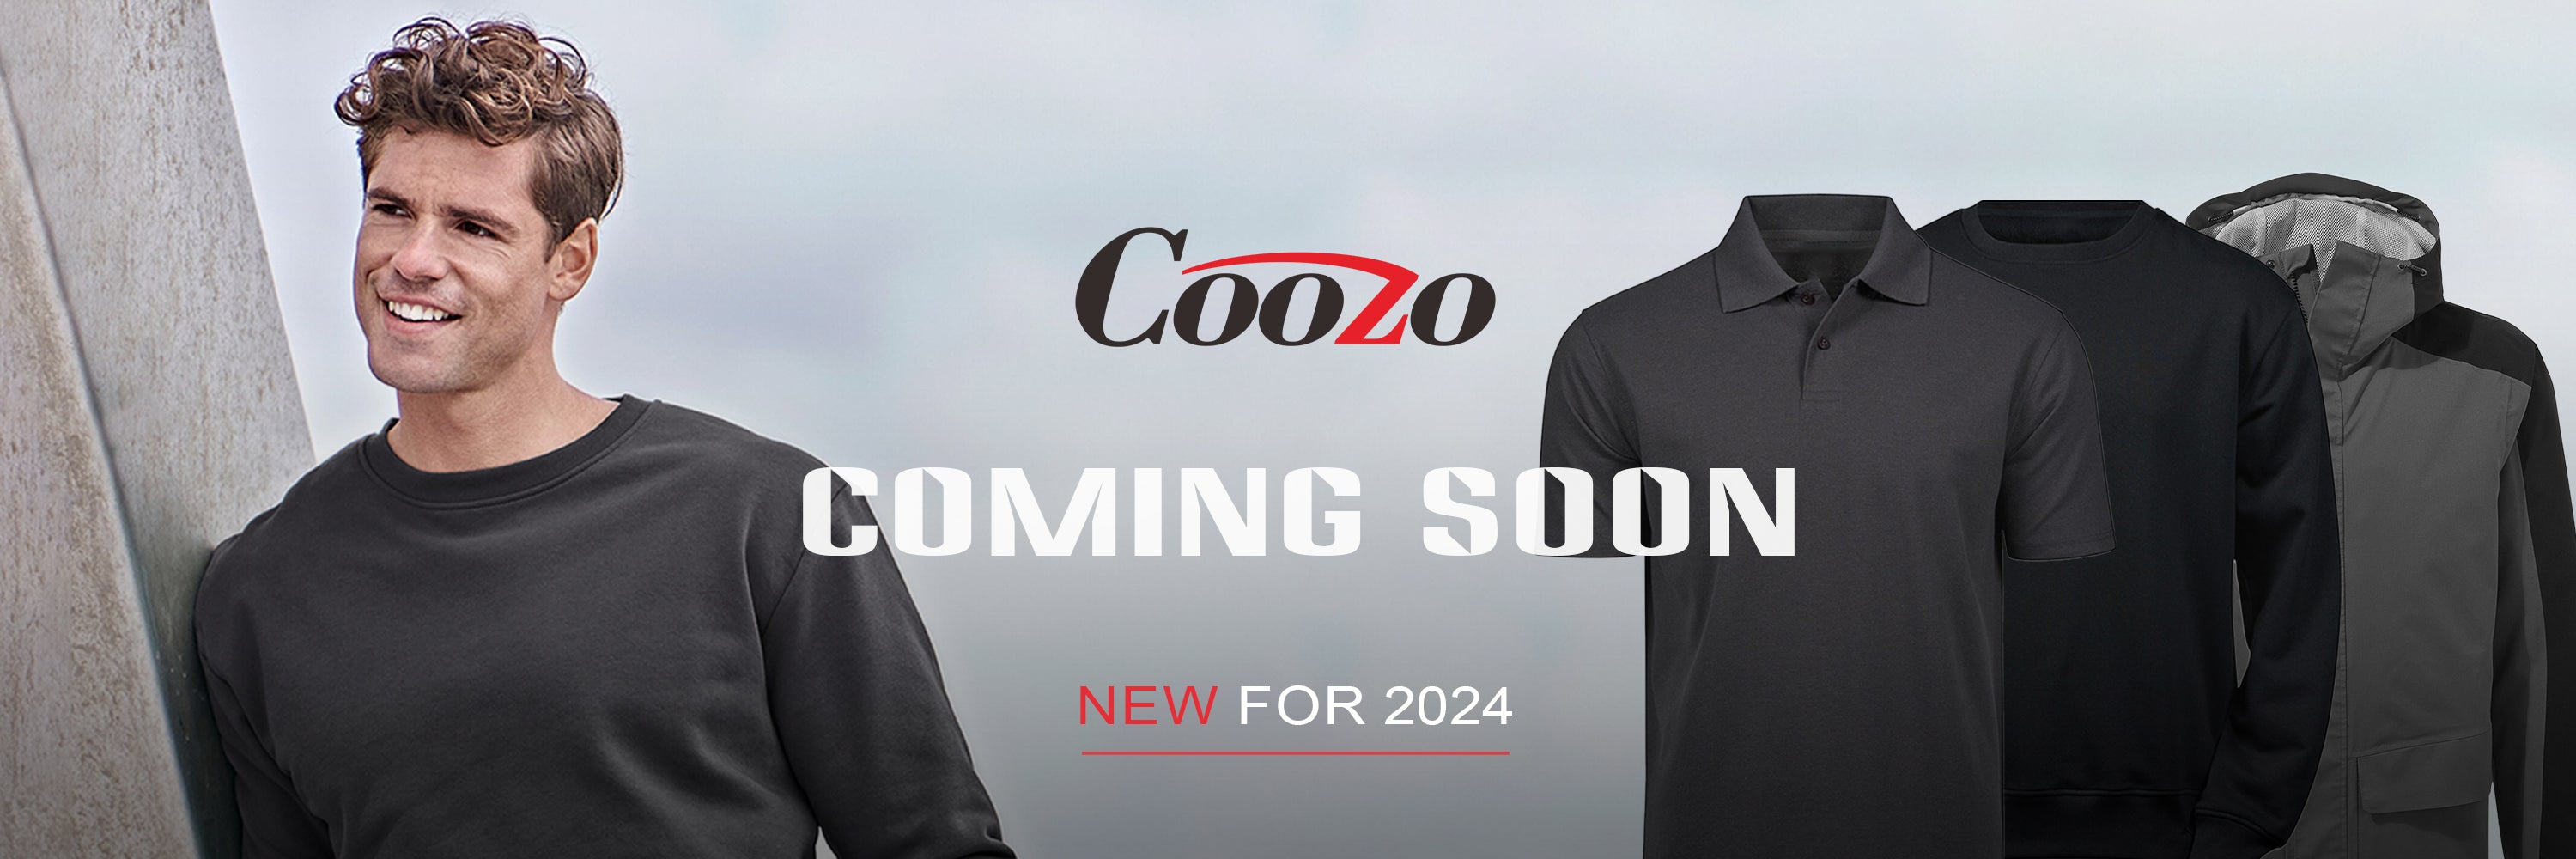 COOZO | Fashion & Leisure Clothing | Free Postage on All Orders